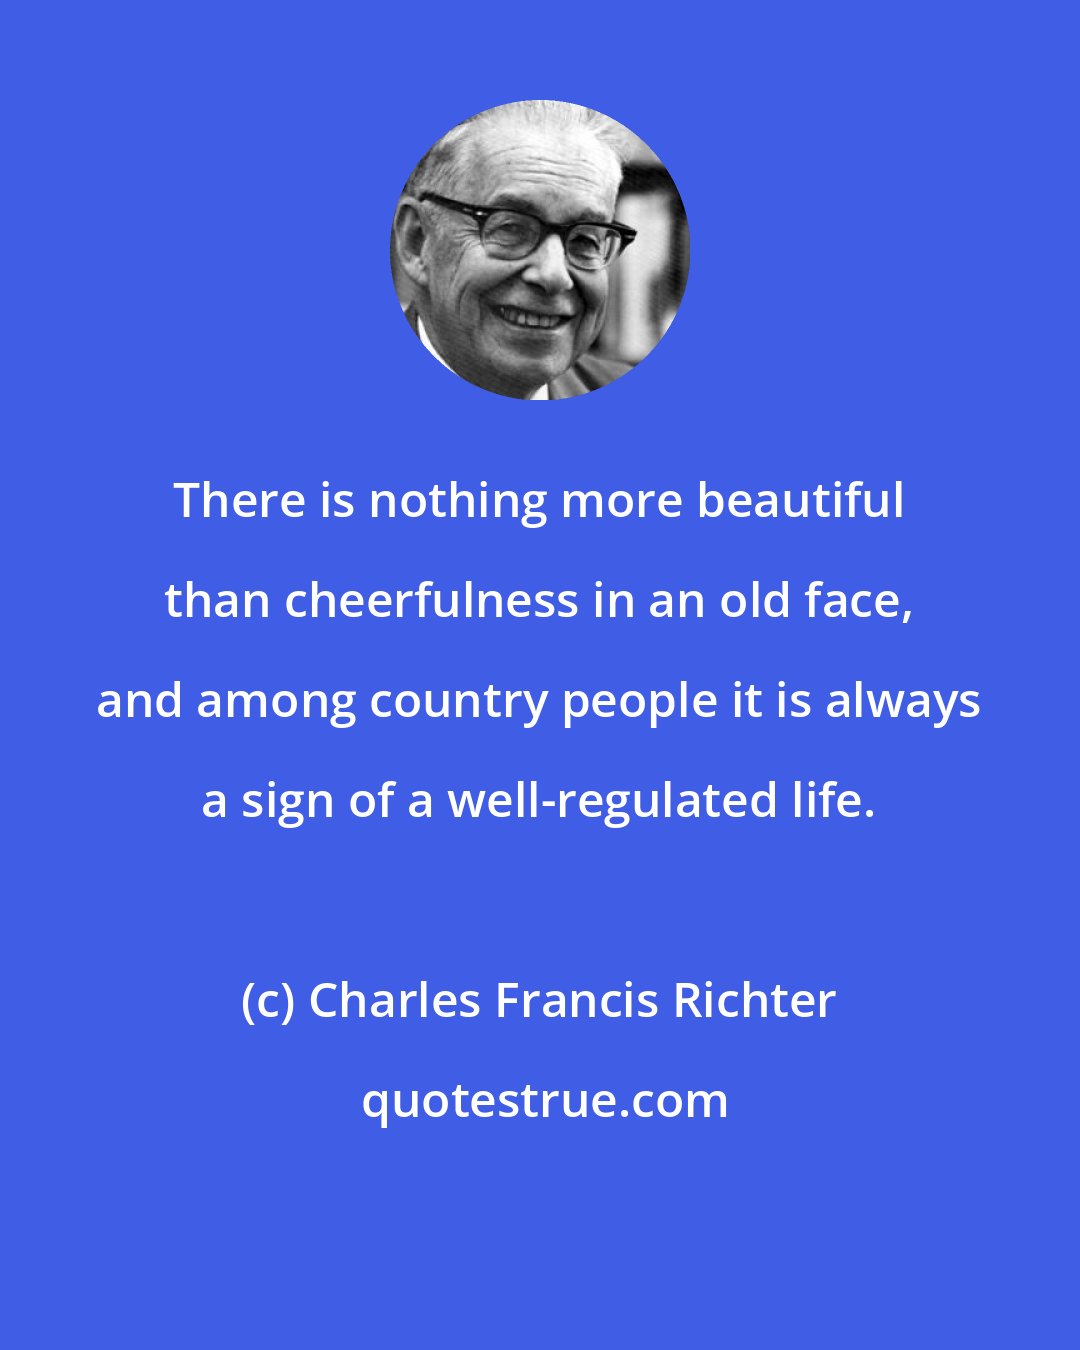 Charles Francis Richter: There is nothing more beautiful than cheerfulness in an old face, and among country people it is always a sign of a well-regulated life.